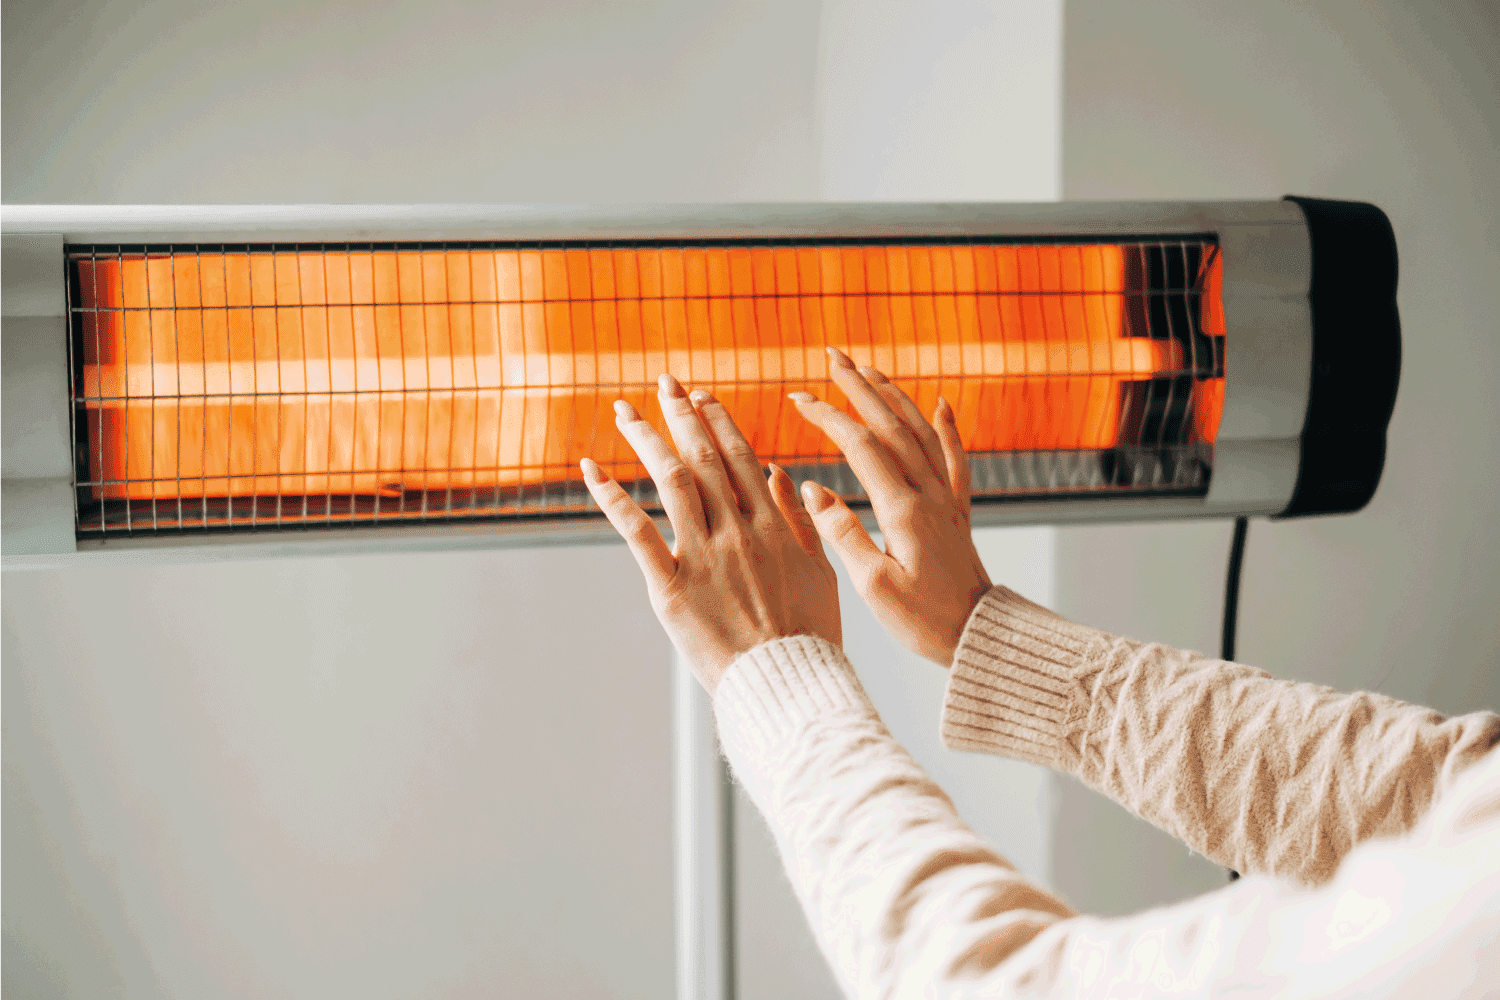 Woman warms up hands over electric heater. Concept of the need for good central heating